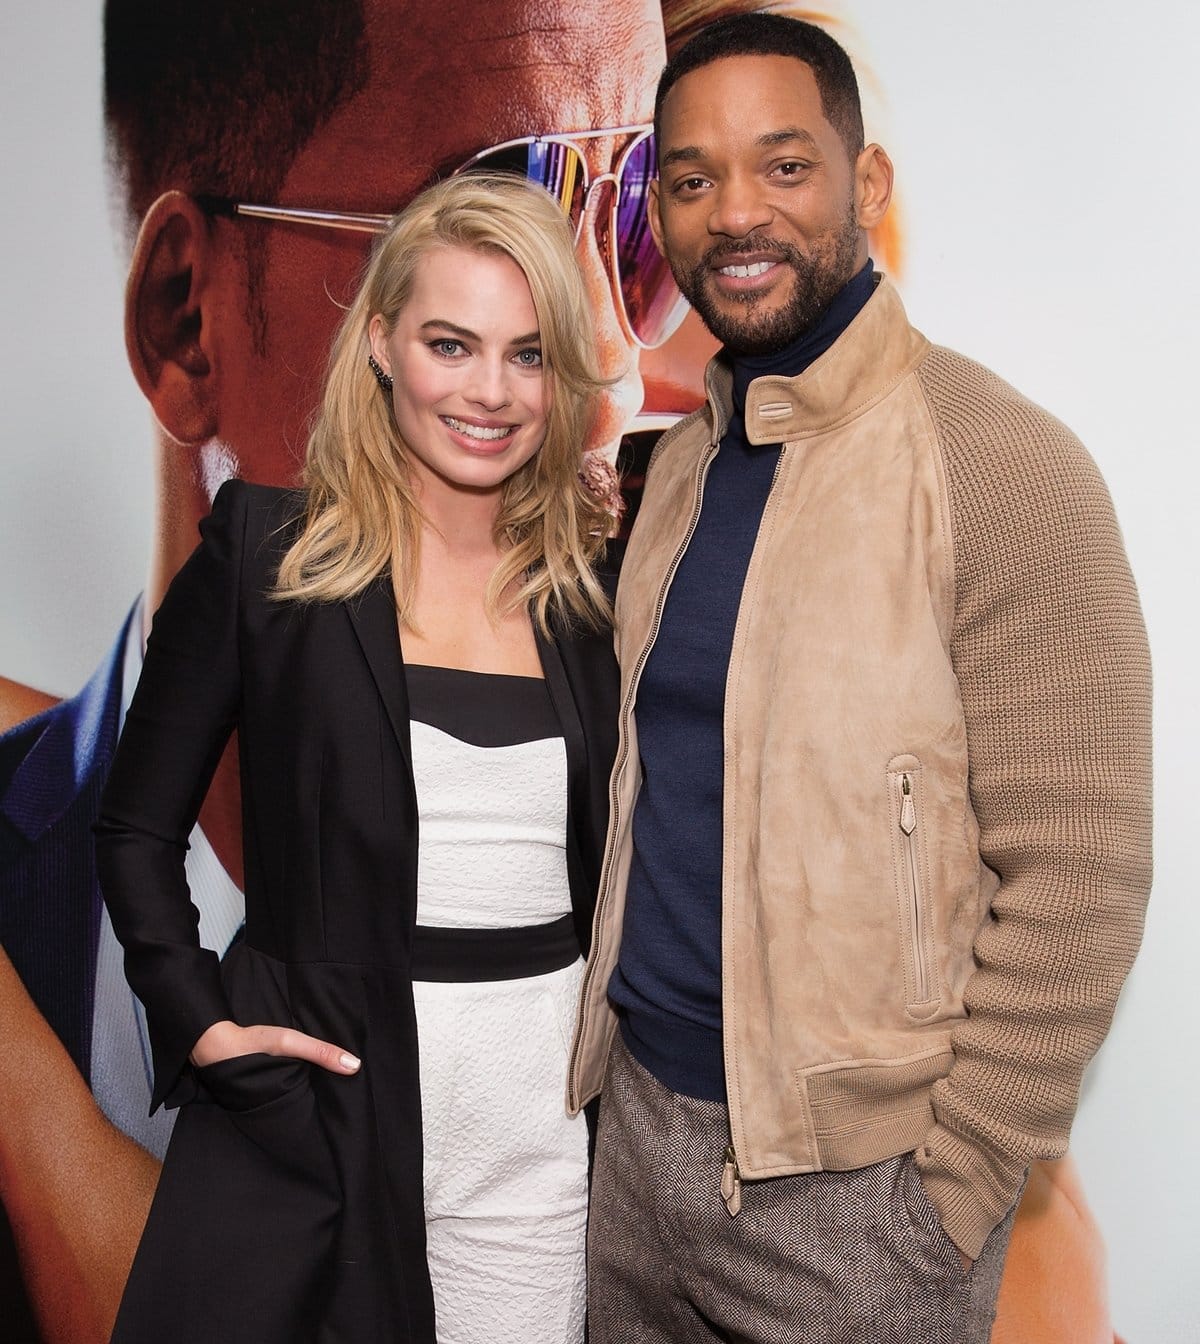 The rumors about Will Smith and Margot Robbie having an affair have circulated for years